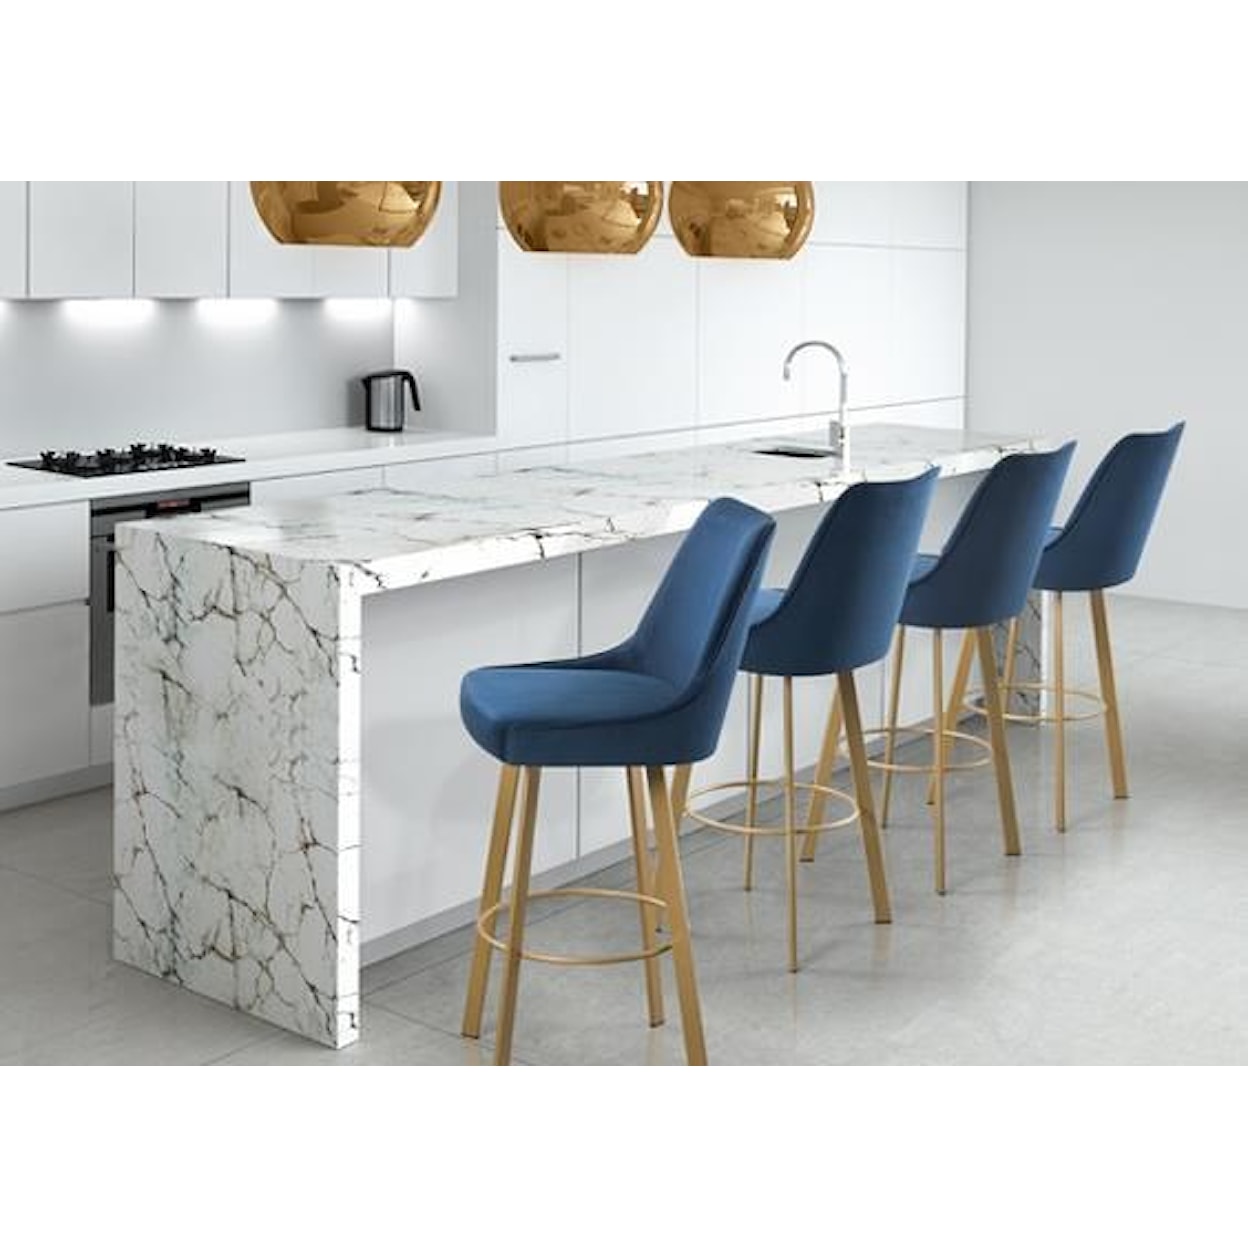 Trica Olivia Counter Stool